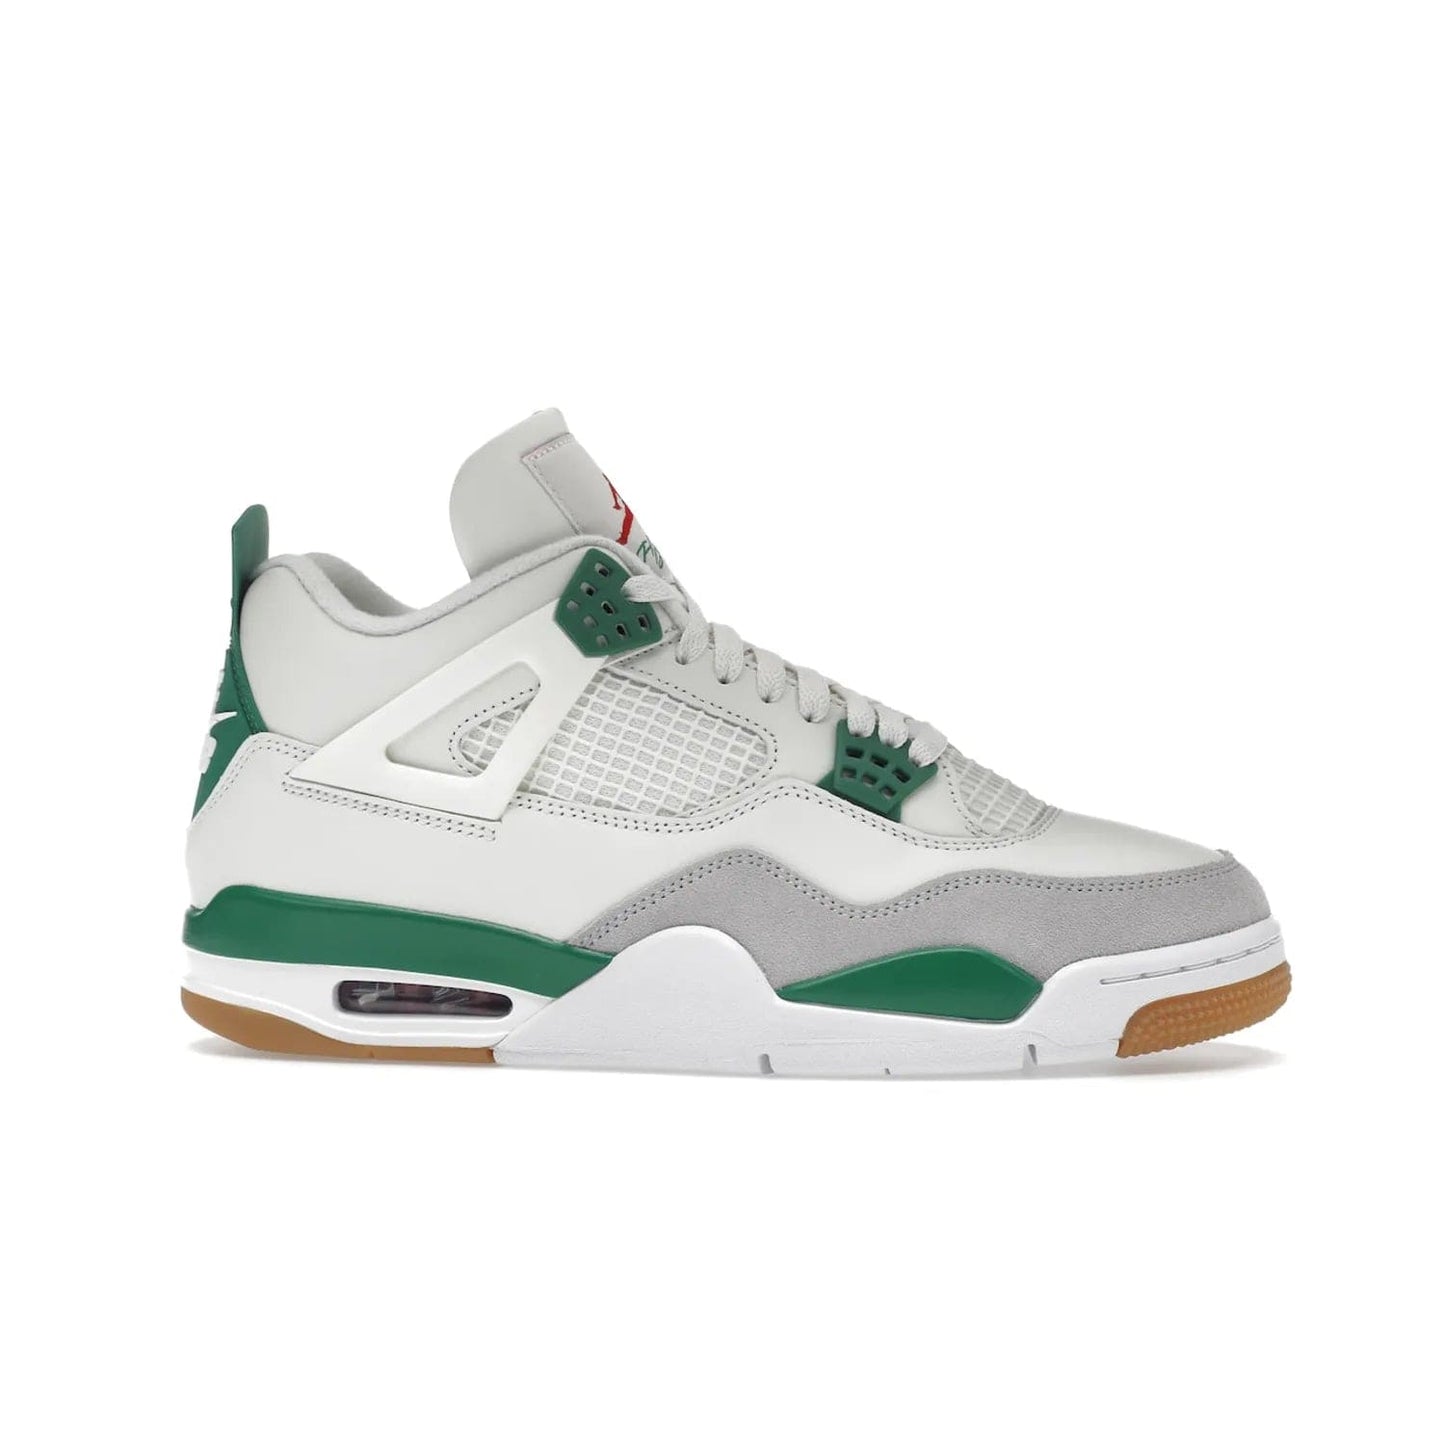 Jordan 4 Retro SB Pine Green - Image 2 - Only at www.BallersClubKickz.com - A white leather upper combined with a Neutral Grey suede mudguard gives this limited Air Jordan 4 Retro SB Pine Green sneaker its unmistakable style. Released March 20, 2023, the Jordan 4 Retro SB features a white and Pine Green midsole plus a red air unit with a gum outsole for grip. The perfect blend of Nike SB skateboarding and Jordan 4 classic design.